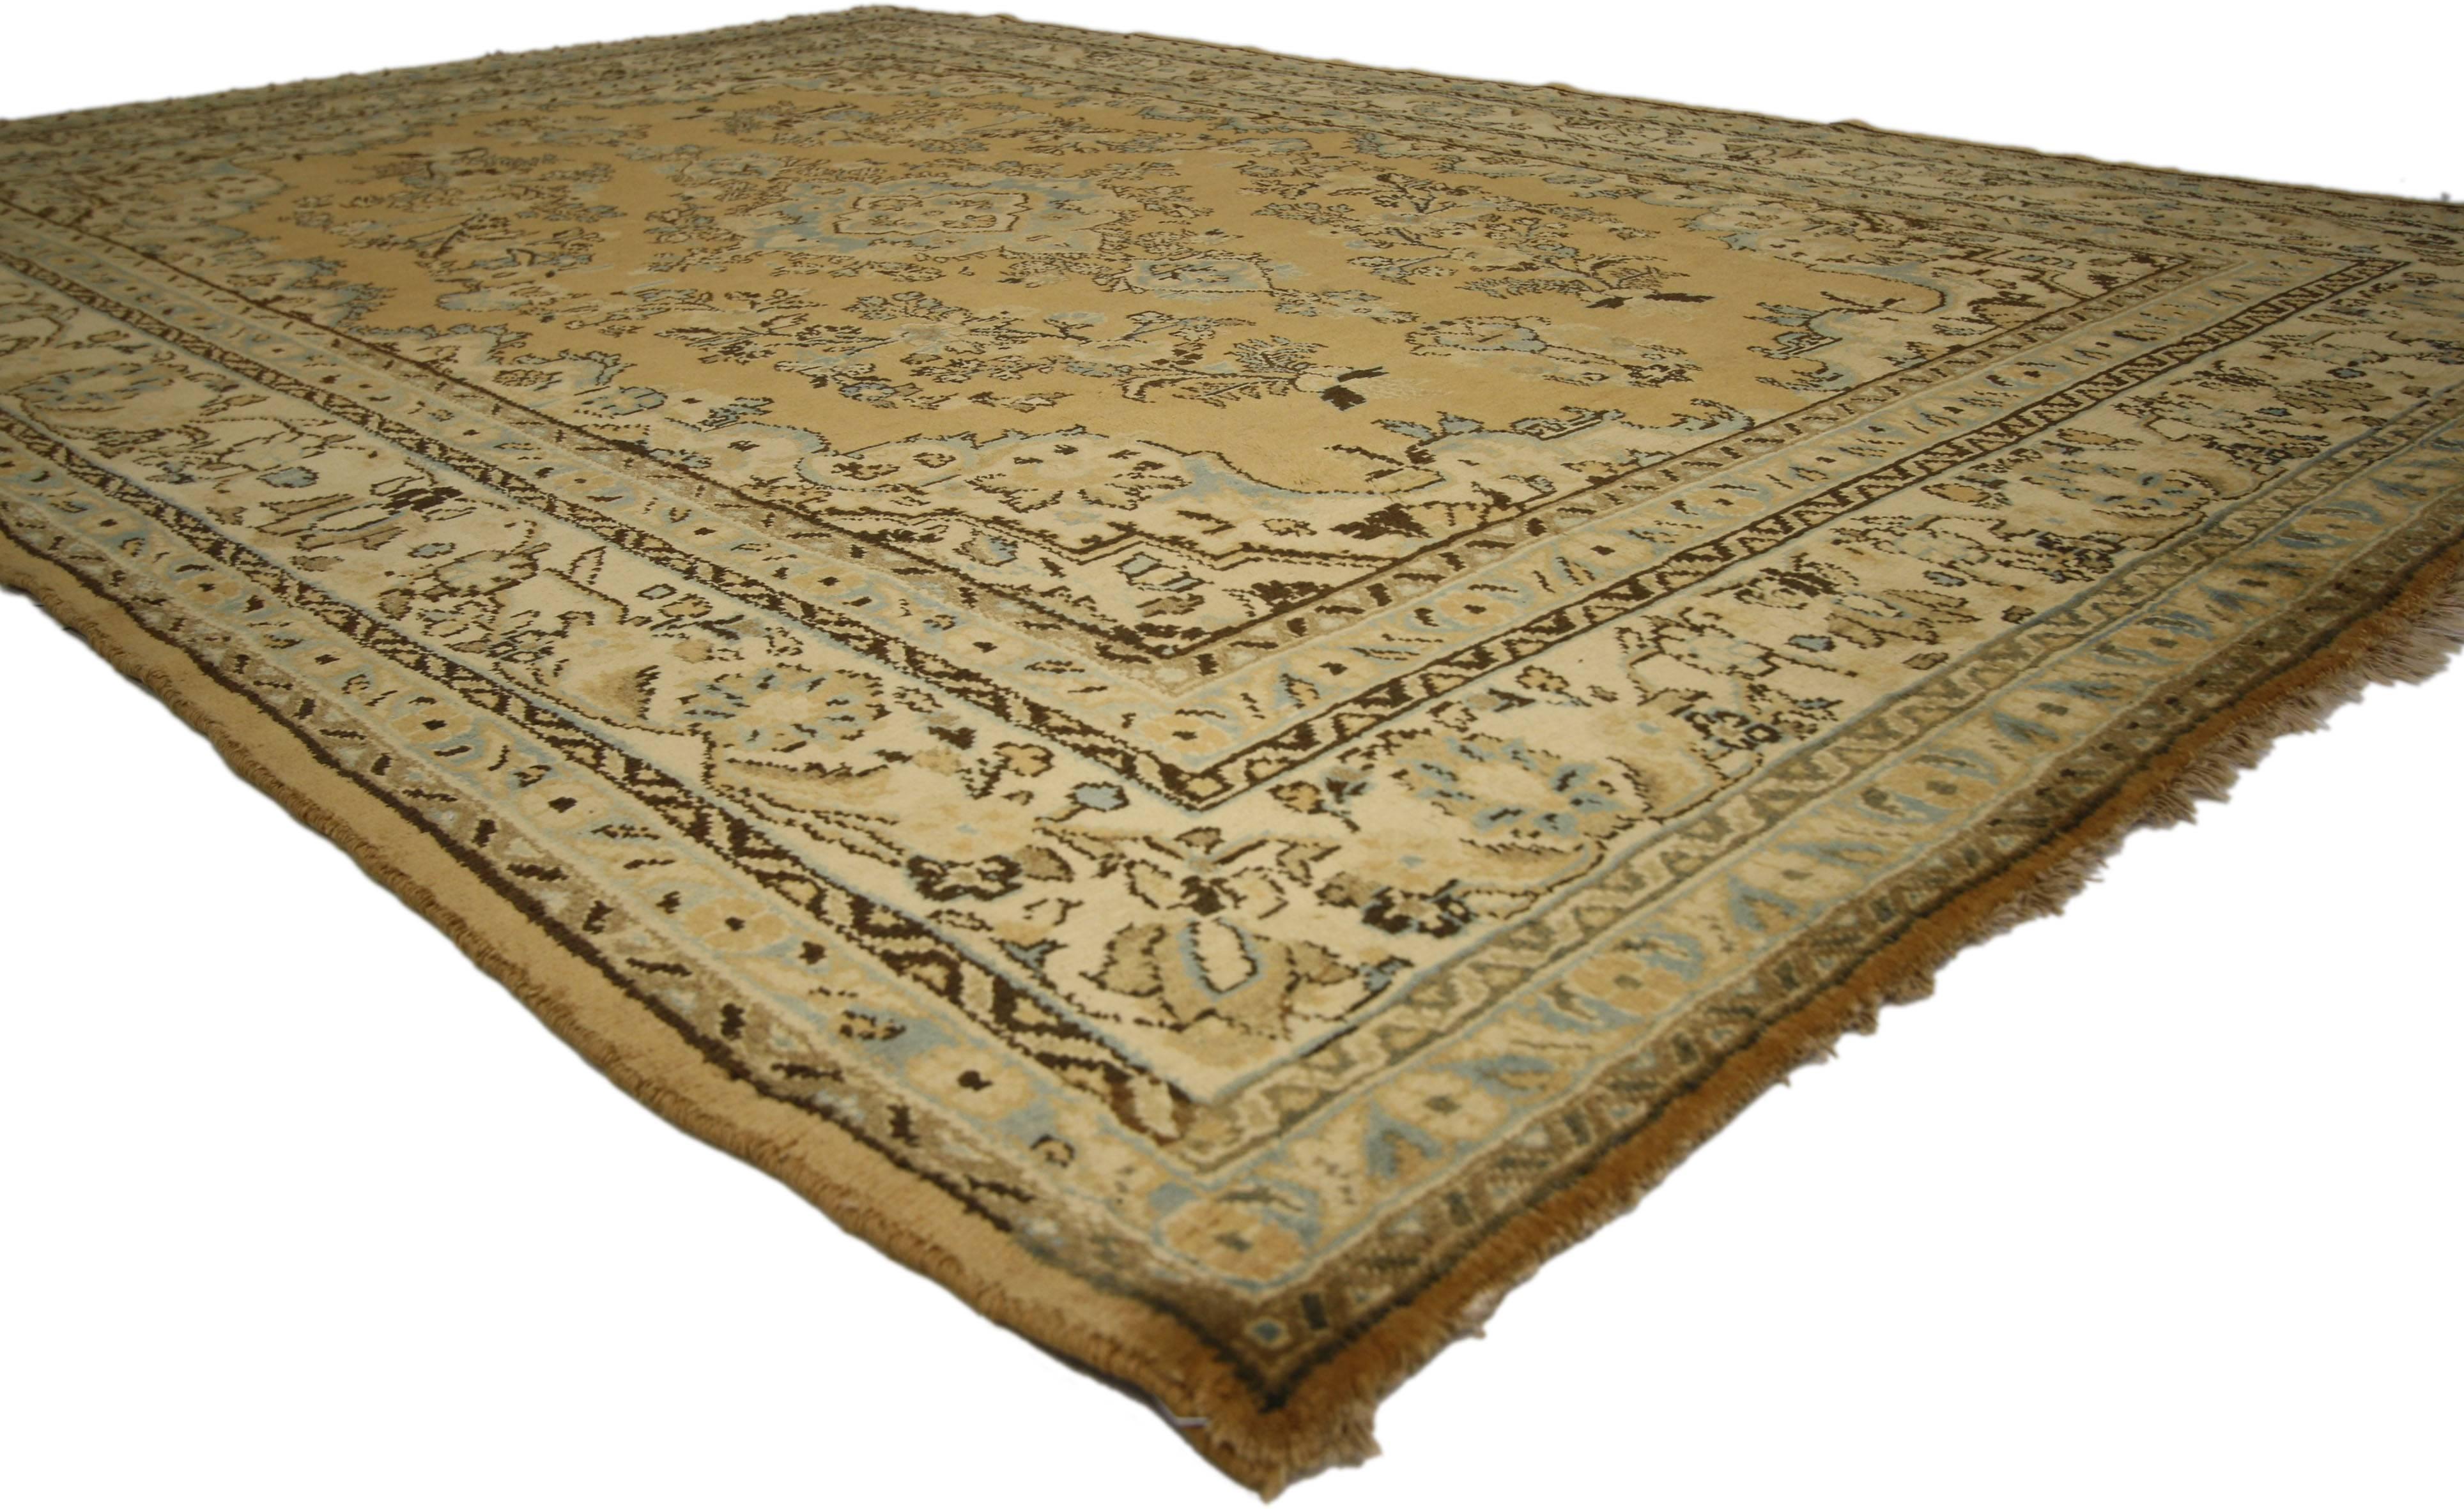 76087, vintage Persian Hamadan rug with American Sarouk style. This hand-knotted wool vintage Persian Hamadan rug with American Sarouk style features elaborate curtain-like spandrels and small Sarouk medallion surrounded by an arrangement of floral